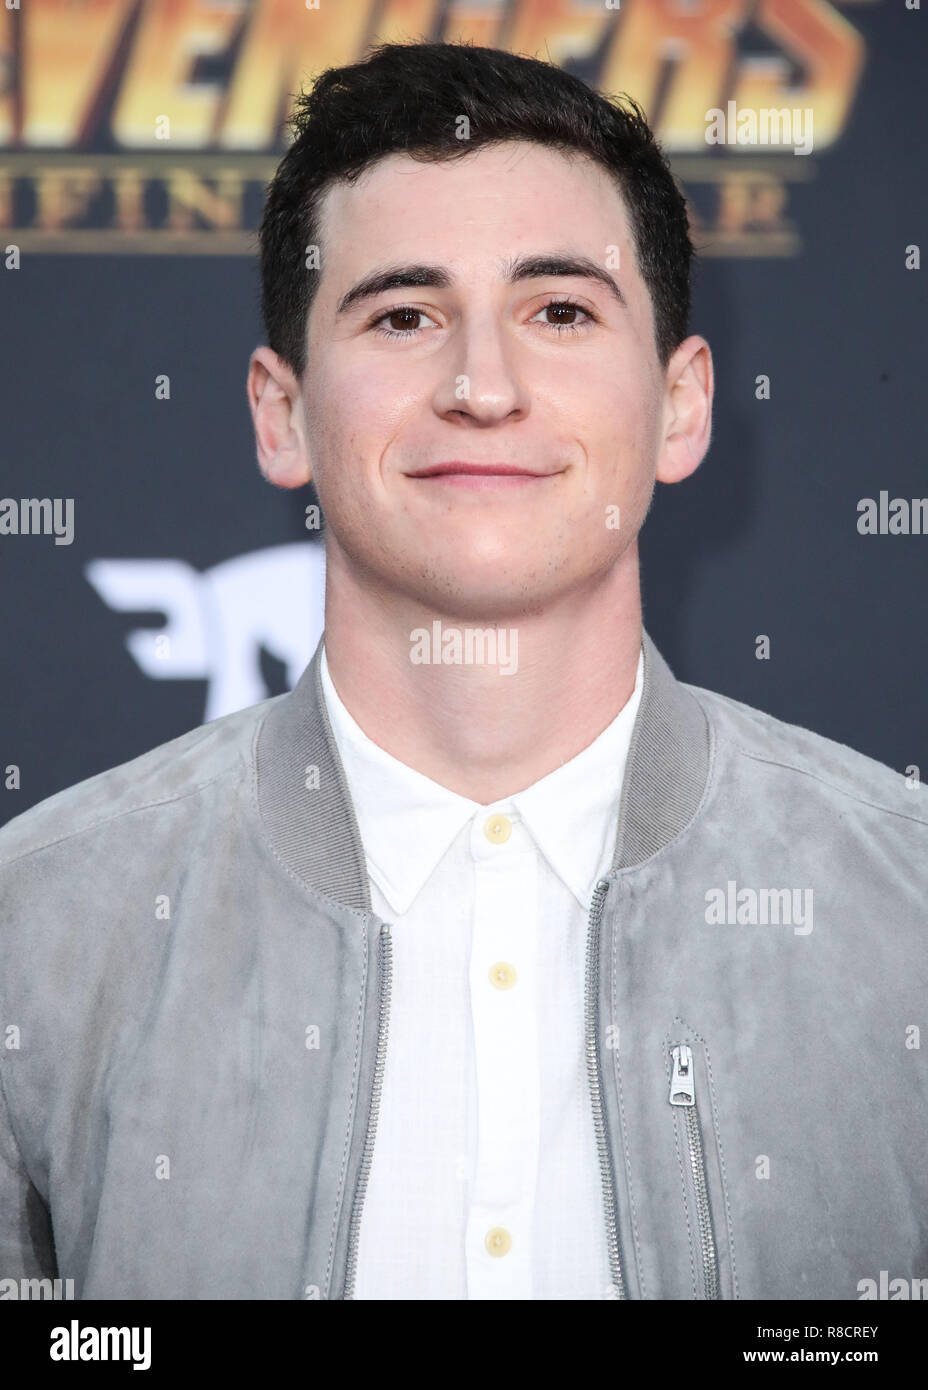 HOLLYWOOD, LOS ANGELES, CA, USA - APRIL 23: Sam Lerner at the World Premiere Of Disney And Marvel's 'Avengers: Infinity War' held at the El Capitan Theatre, Dolby Theatre and TCL Chinese Theatre IMAX on April 23, 2018 in Hollywood, Los Angeles, California, United States. (Photo by Xavier Collin/Image Press Agency) Stock Photo